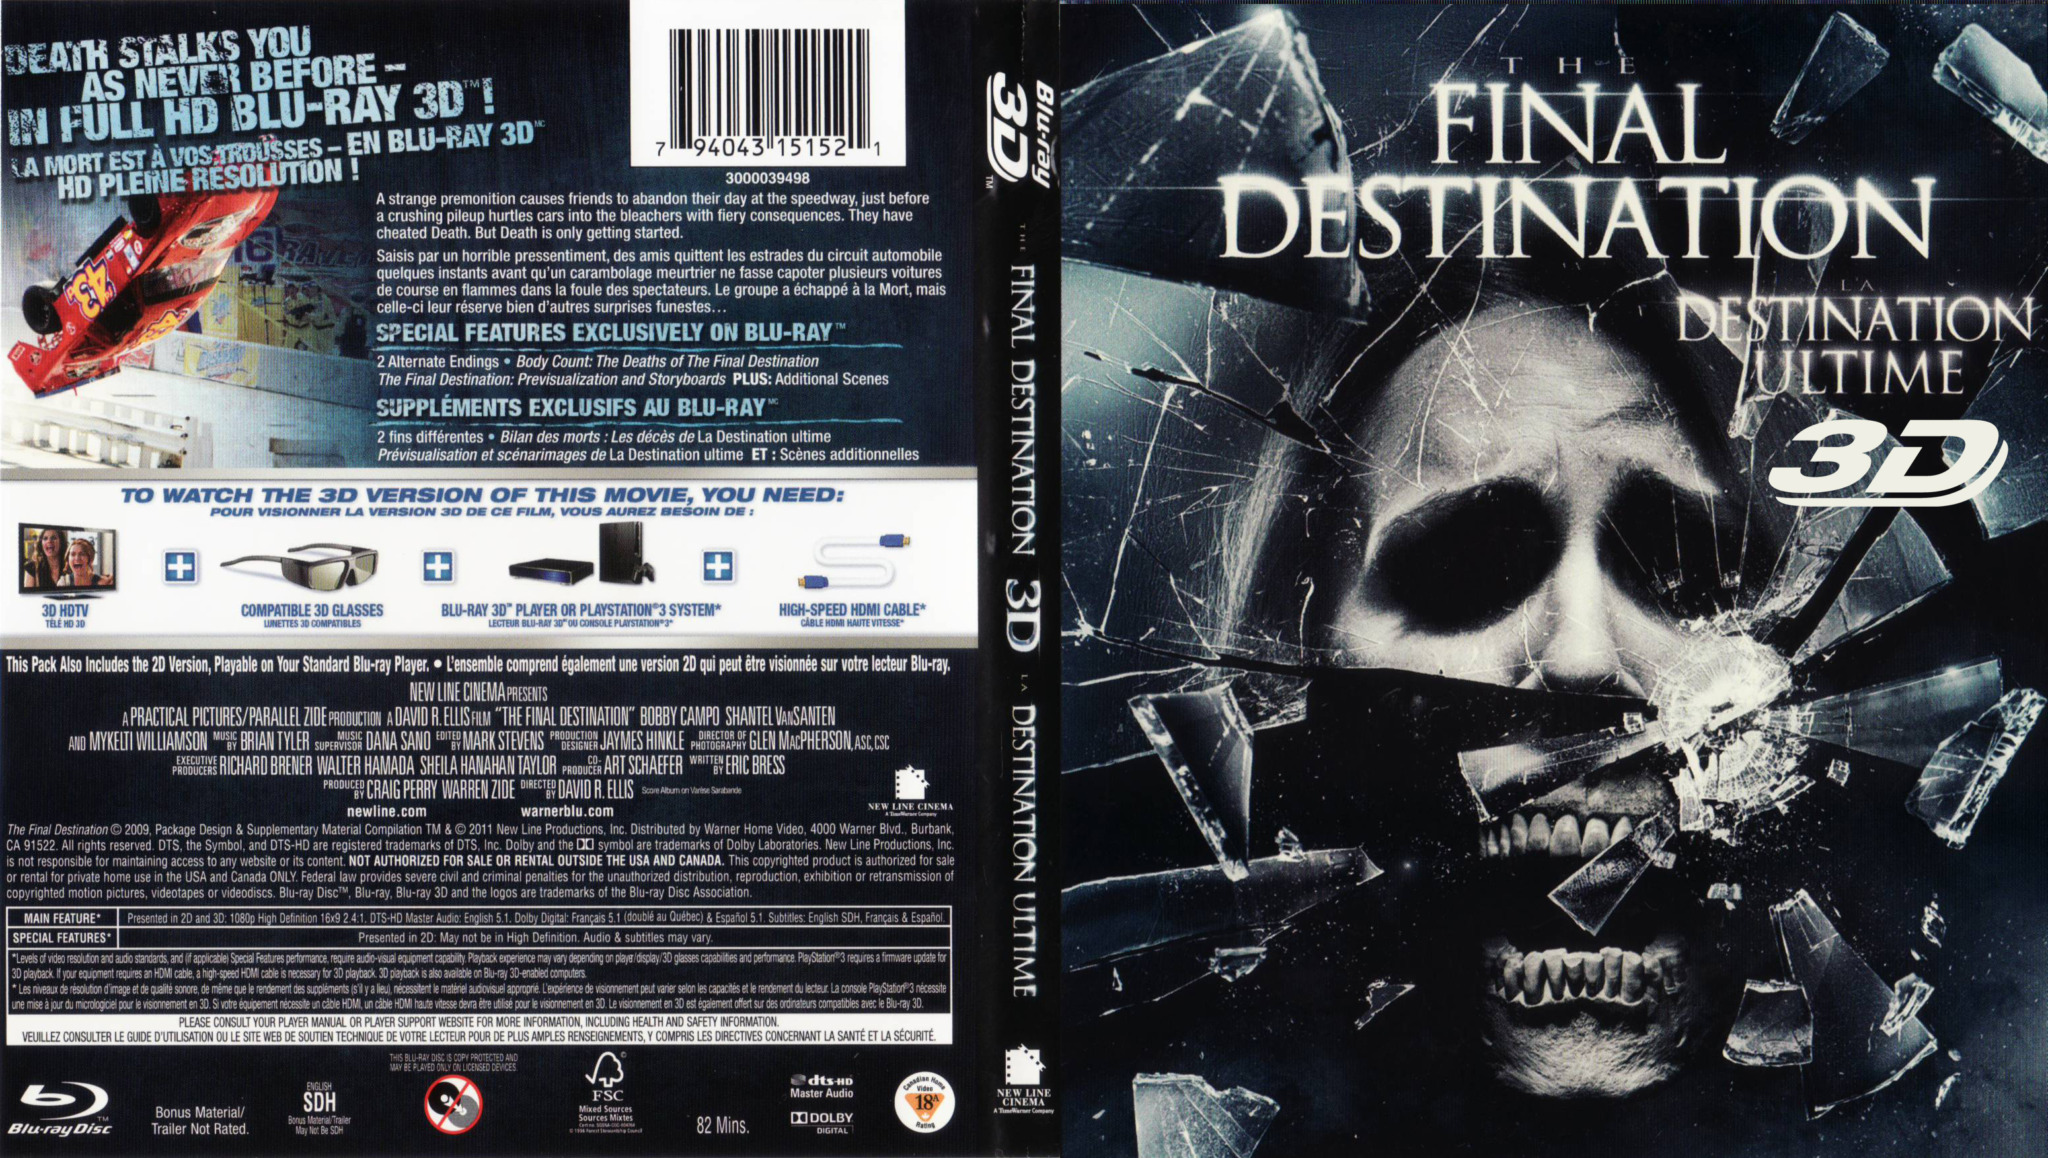 The Final Destination 3d 2009 Blu Ray Cover And Label Dvdcovercom 